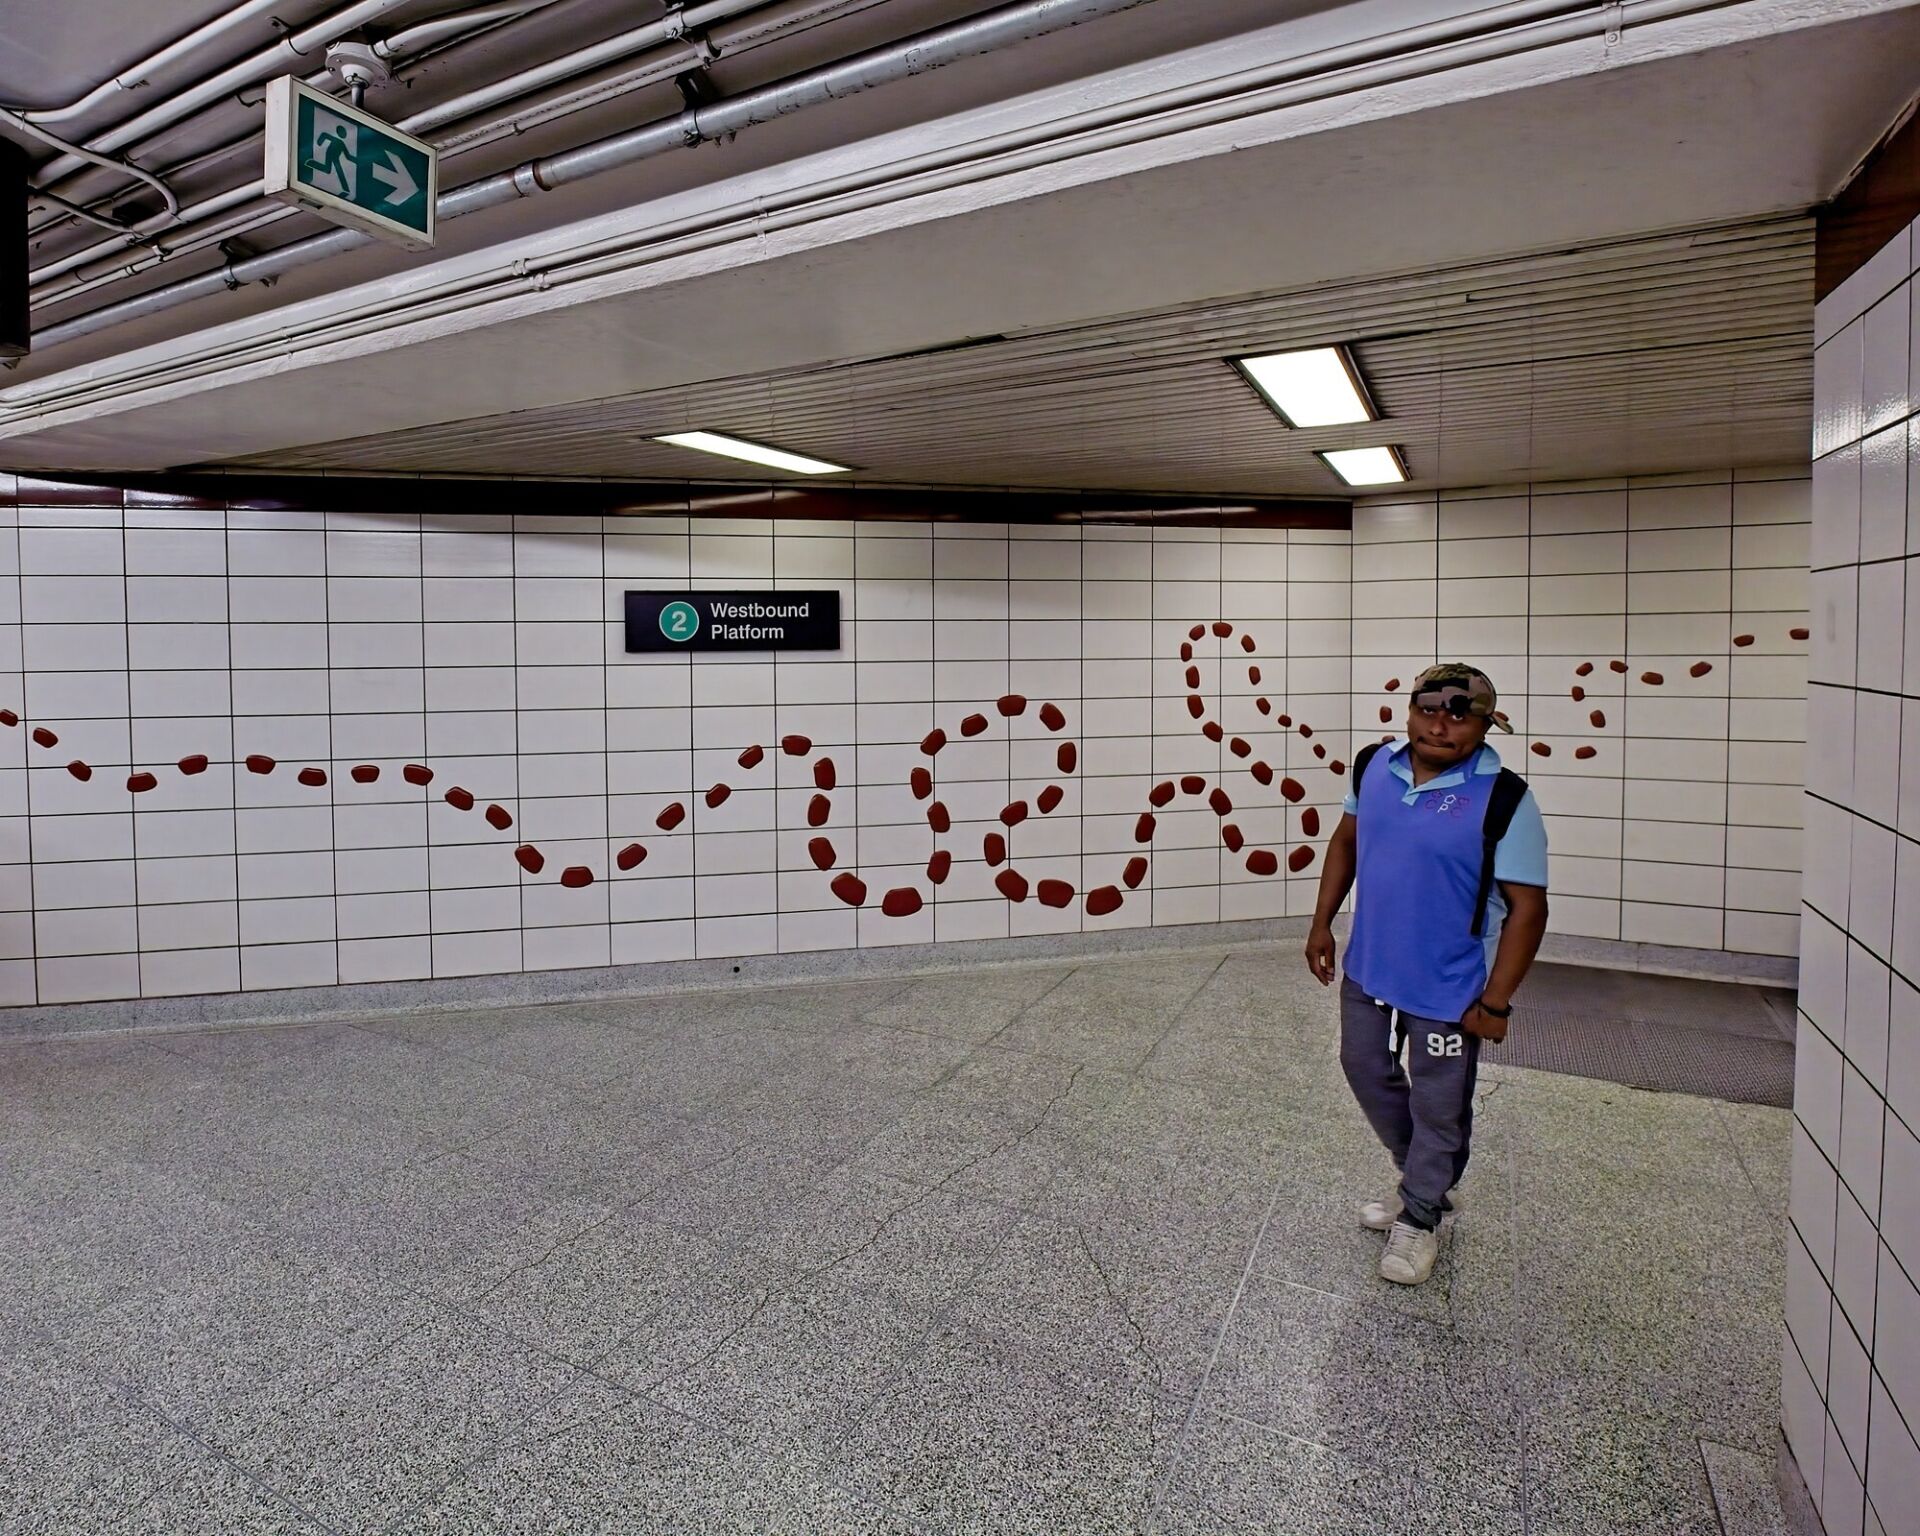 Station interior with path/breadcrumb motif on the wall